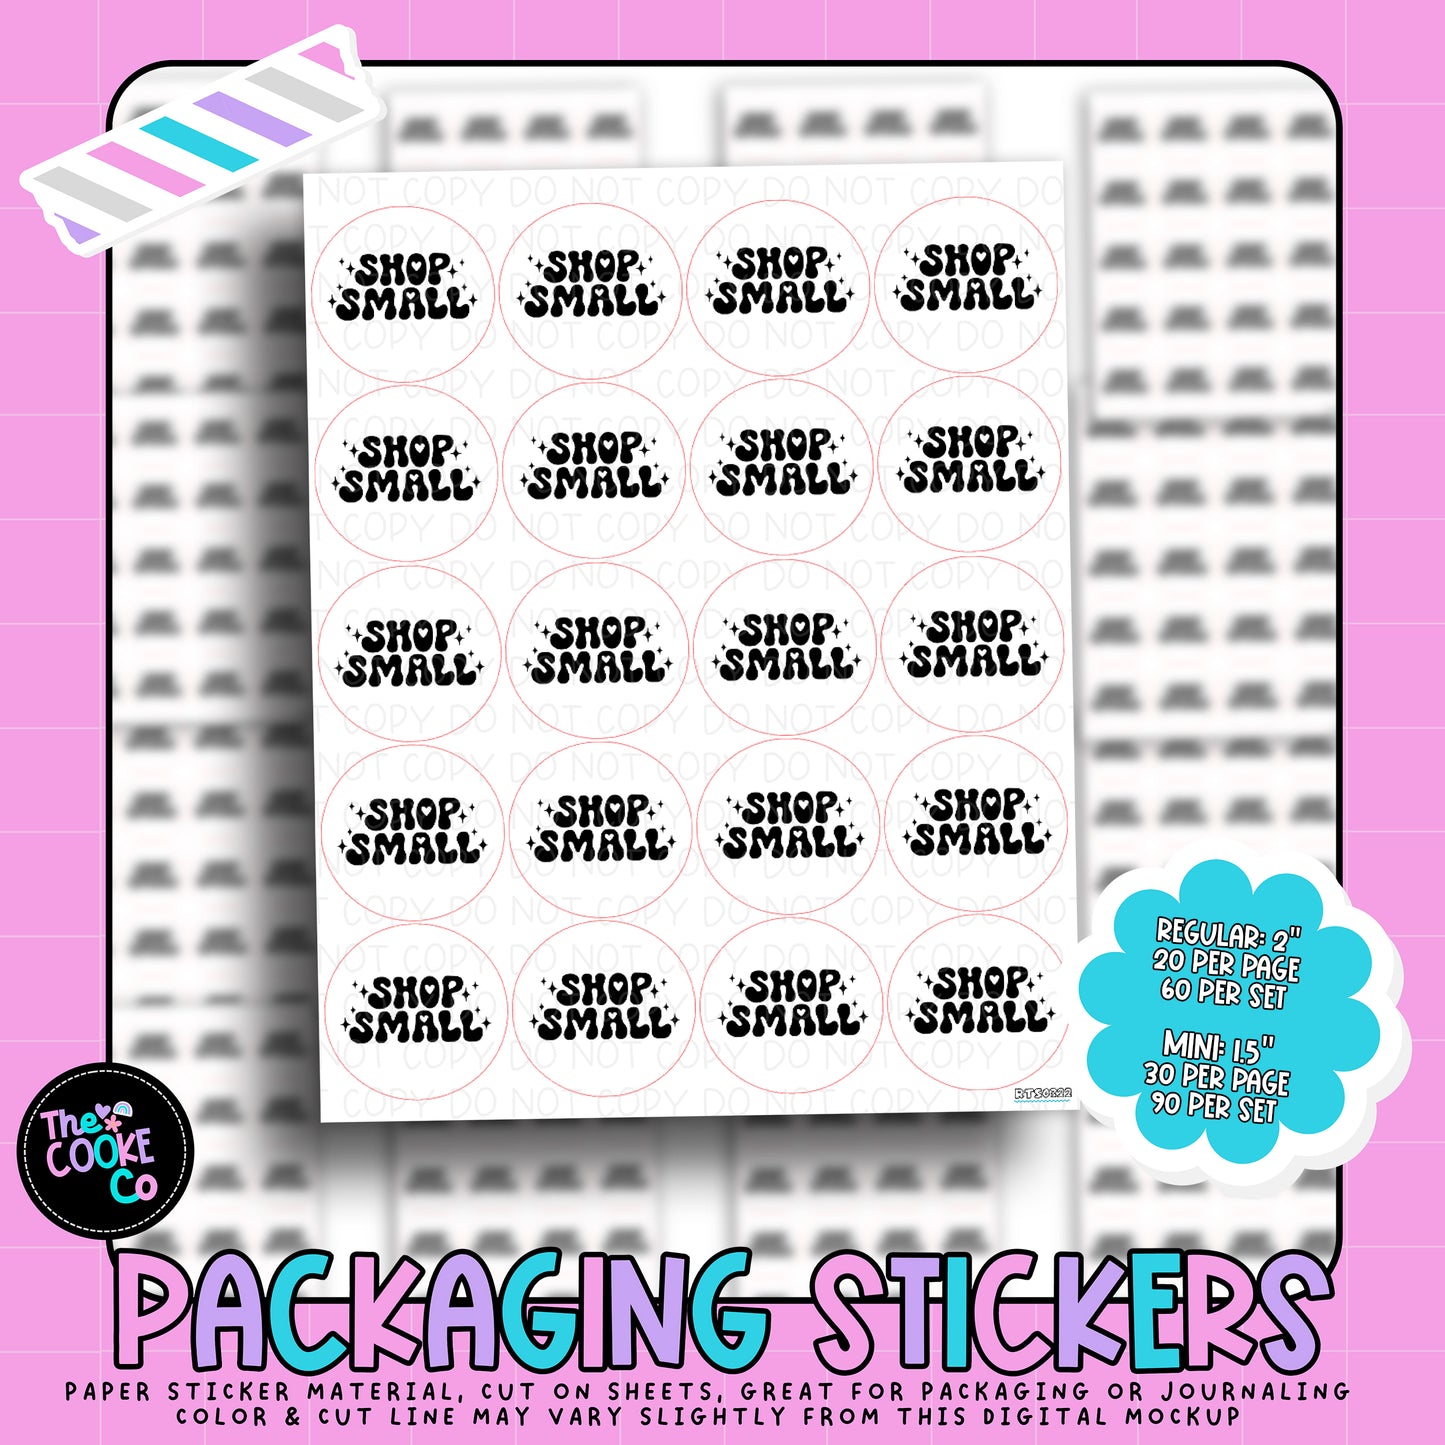 Packaging Stickers | #RTS0322 - SHOP SMALL